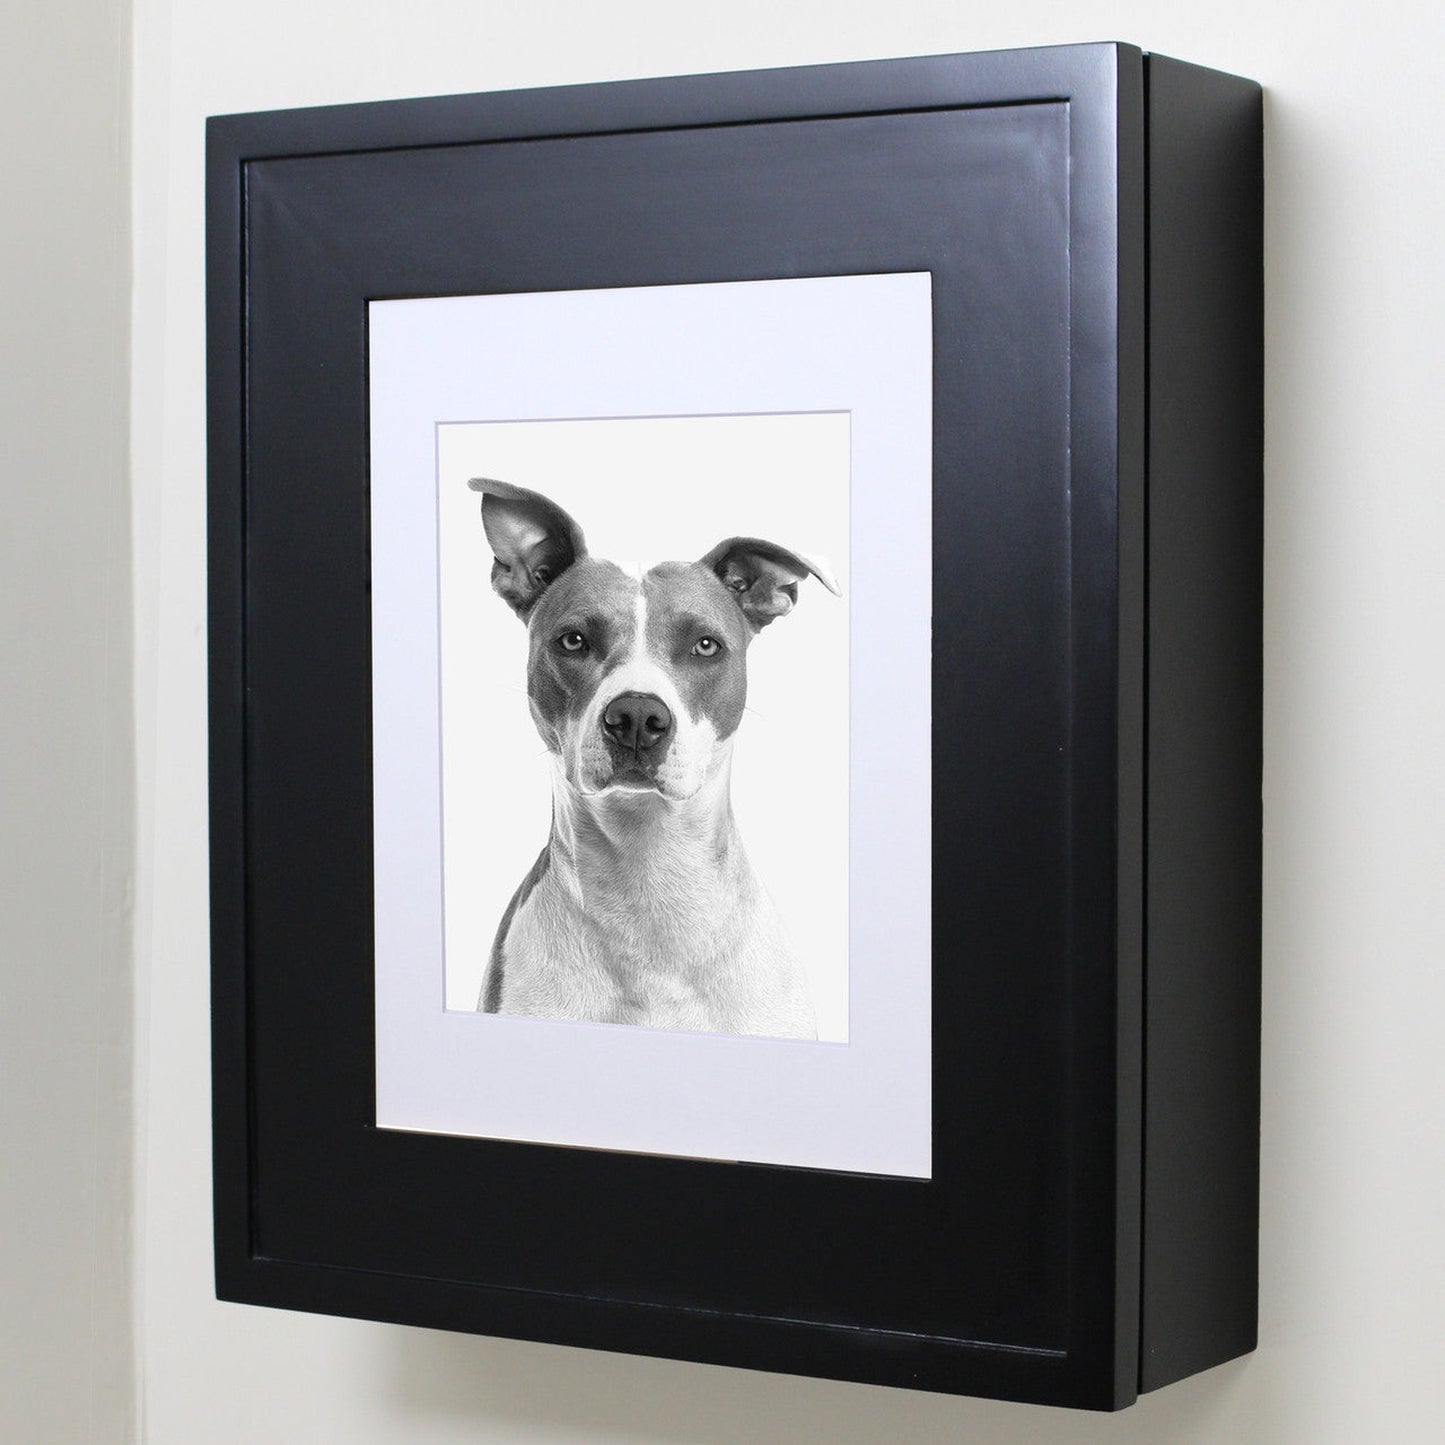 Fox Hollow Furnishings 20" x 17" Black Wall Mount Picture Frame Medicine Cabinet With Mirror